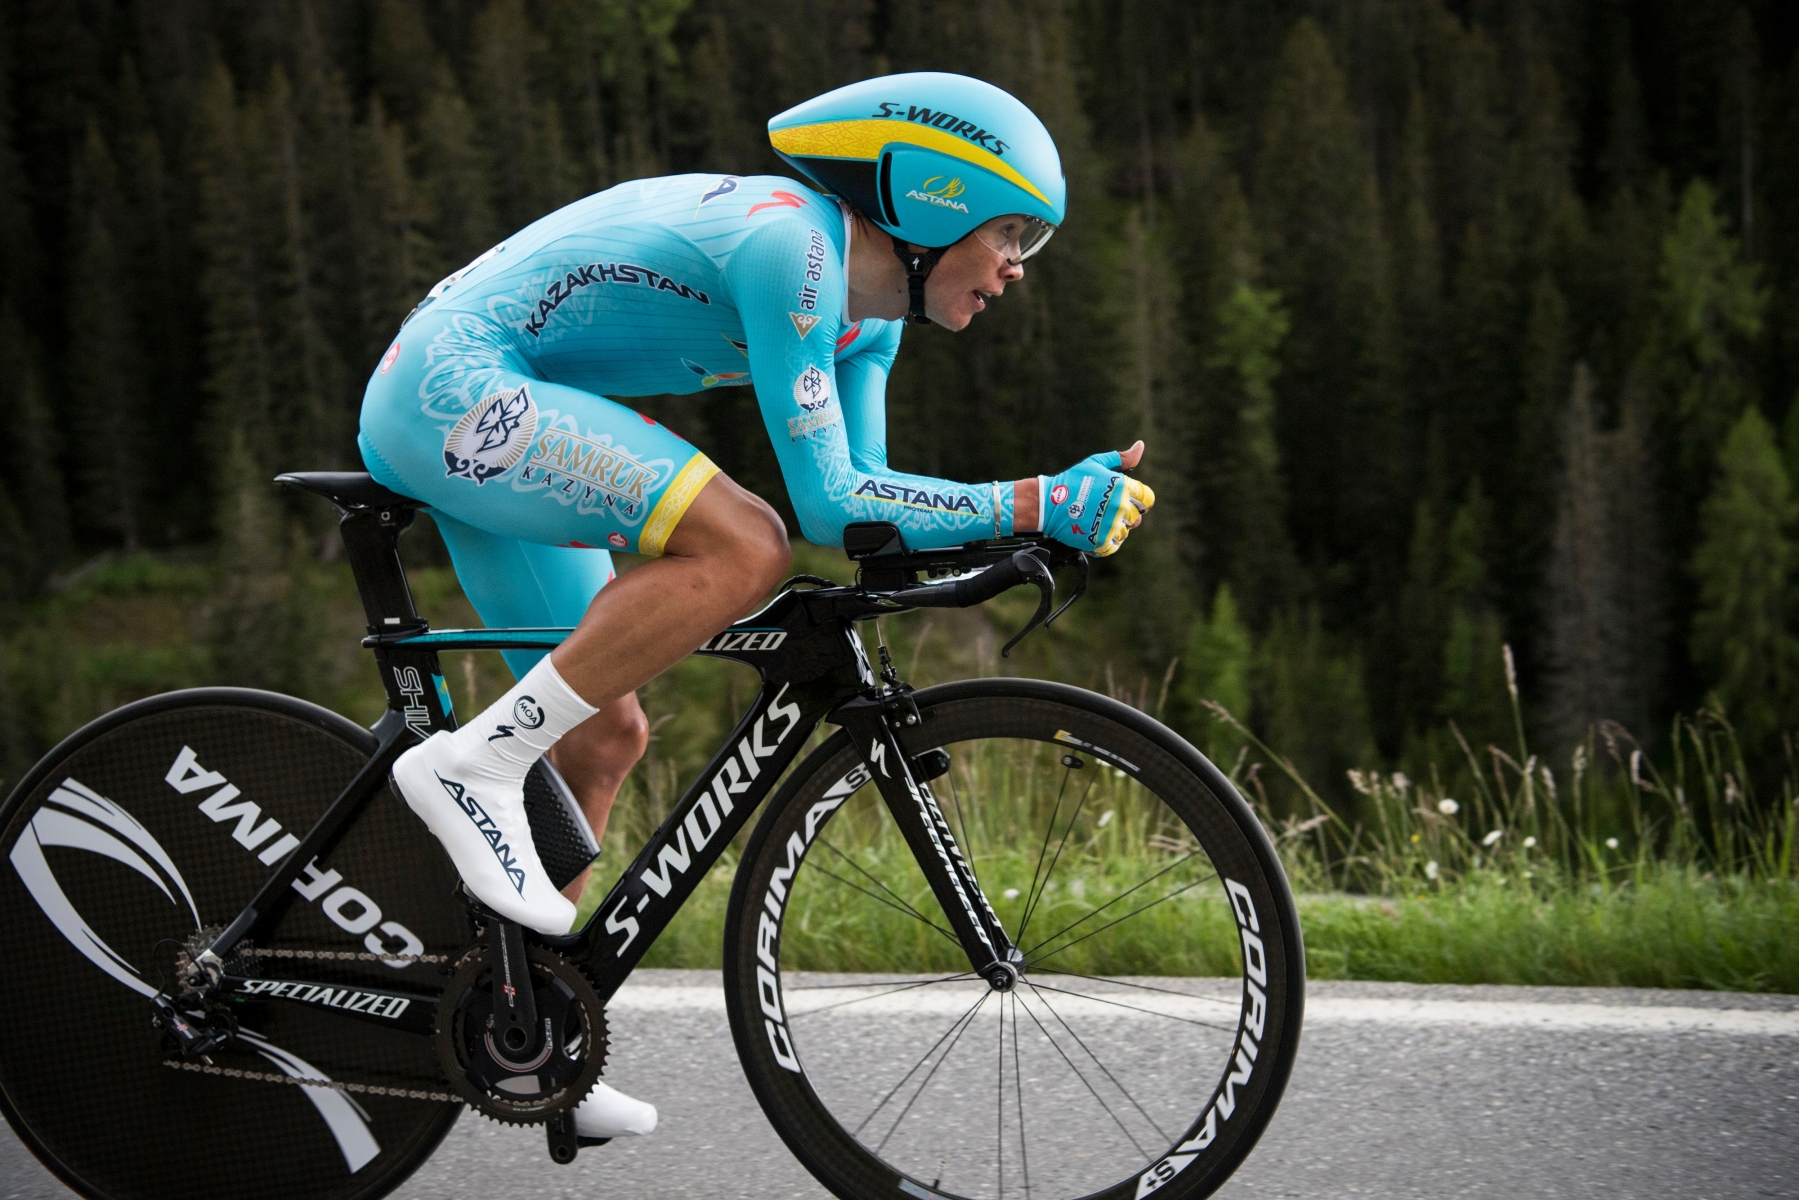 Miguel Angel Lopez Moreno from Columbia of Astana Pro Team is pictured during the 8th stage, a 16,8 km race against the clock from Davos to Davos, Switzerland, at the 80th Tour de Suisse UCI ProTour cycling race, on Saturday, June 18, 2016. (KEYSTONE/Gian Ehrenzeller)Miguel Angel Lopez RAD TOUR DE SUISSE 2016